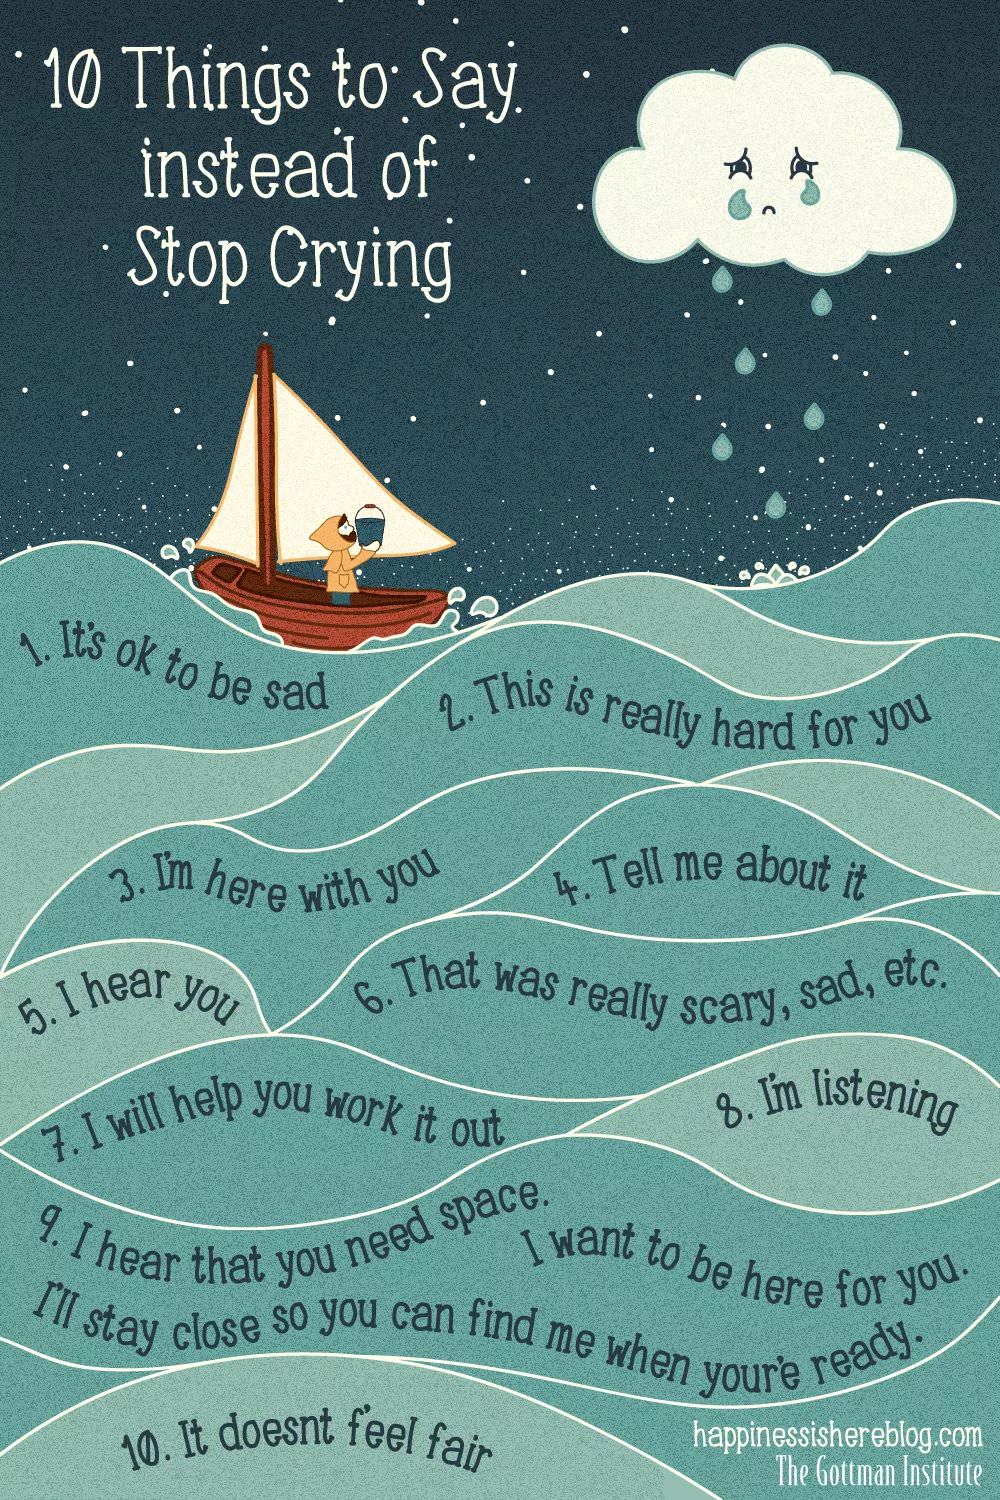 therapy meme - 10 things to say instead of stop crying - 10 Things to Say instead of. Stop Crying 1. It's ok to be sad . This is really hard for you 3. Im here with you 4. Tell me about it 5. I hear you . That was really scary, sed, etc. 7. I will h I wil